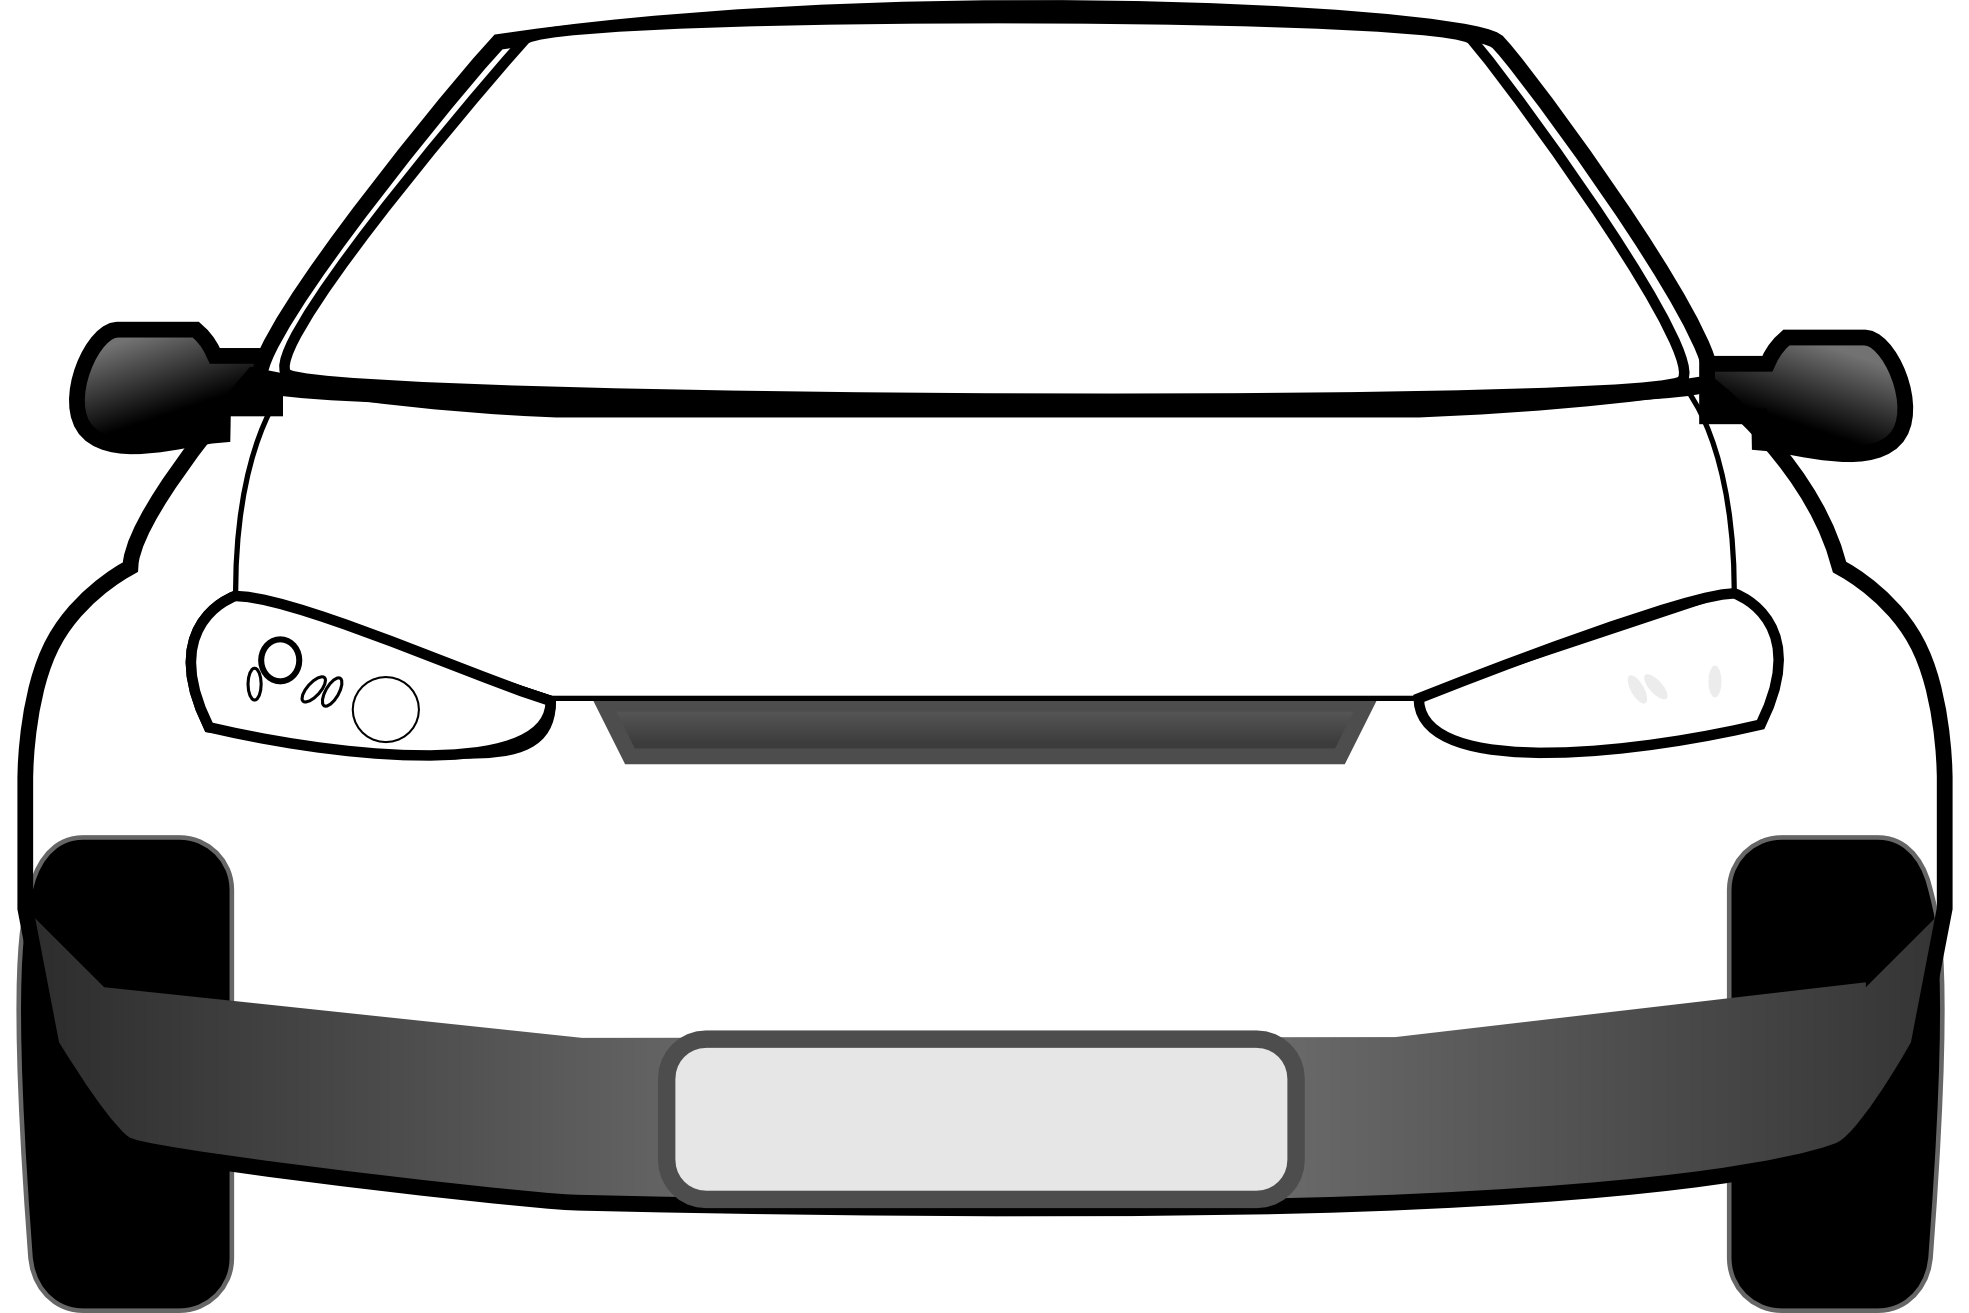 Free Car Vector, Download Free Clip Art, Free Clip Art on